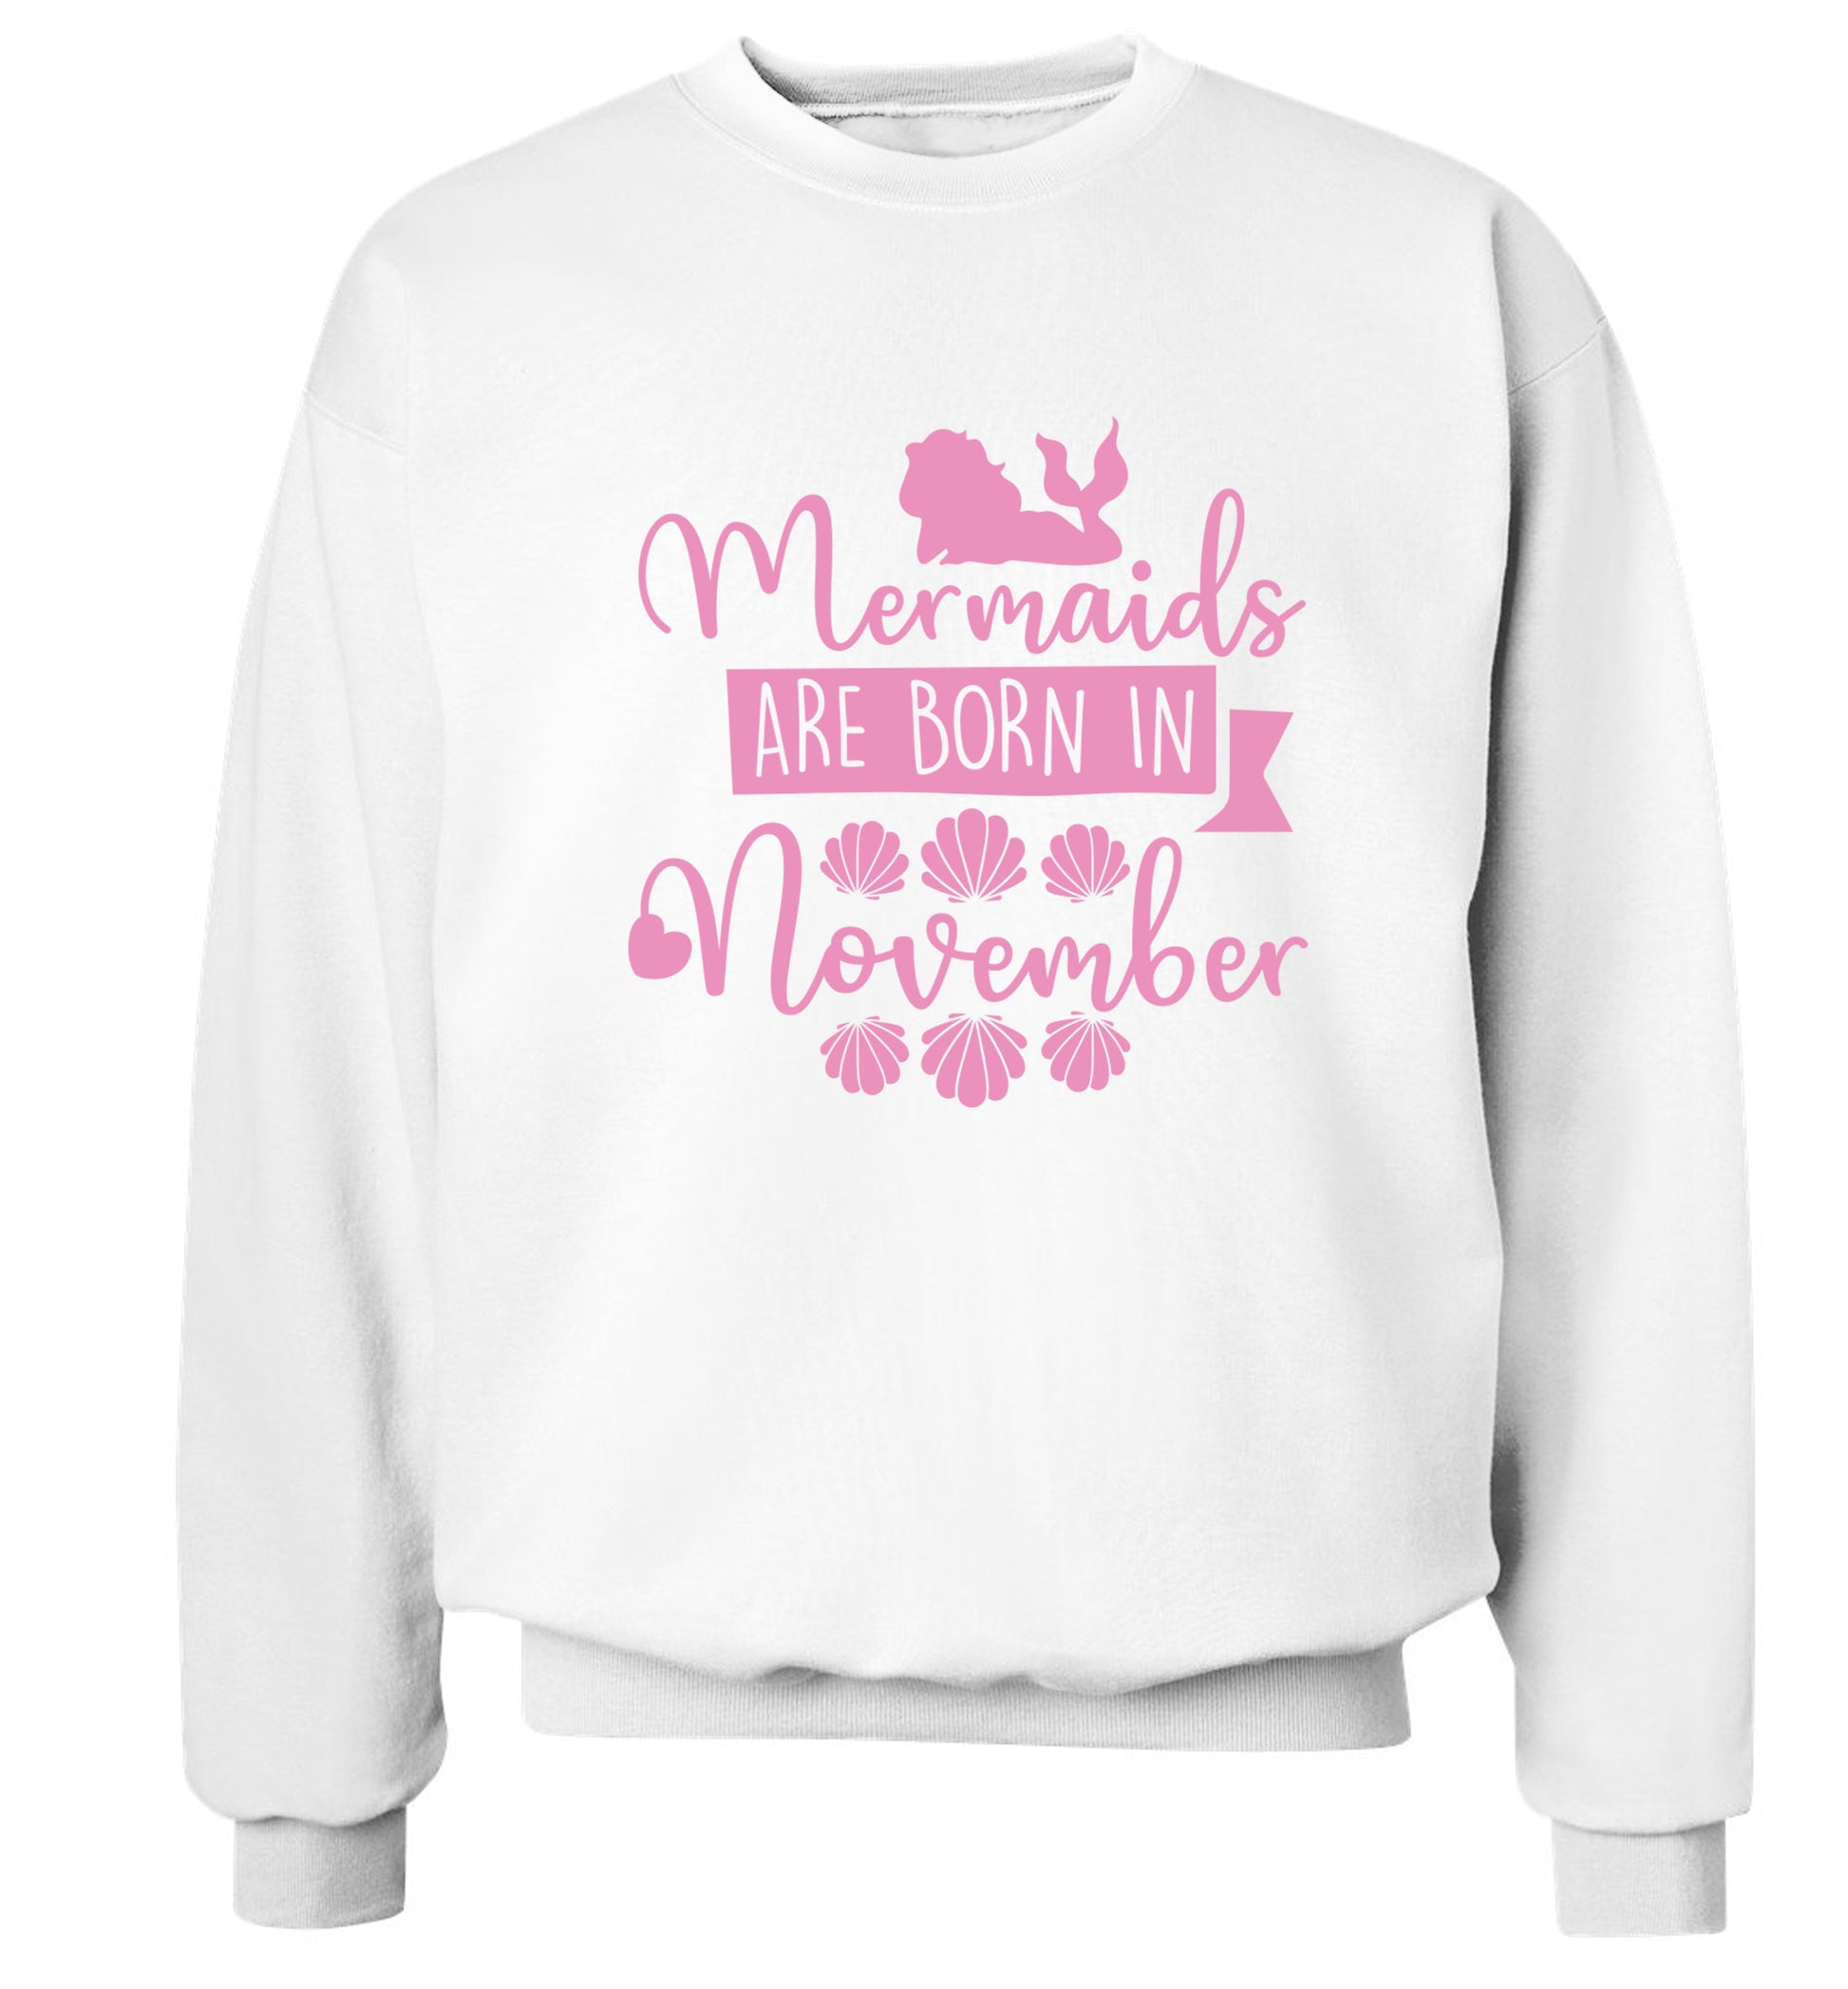 Mermaids are born in November Adult's unisex white Sweater 2XL